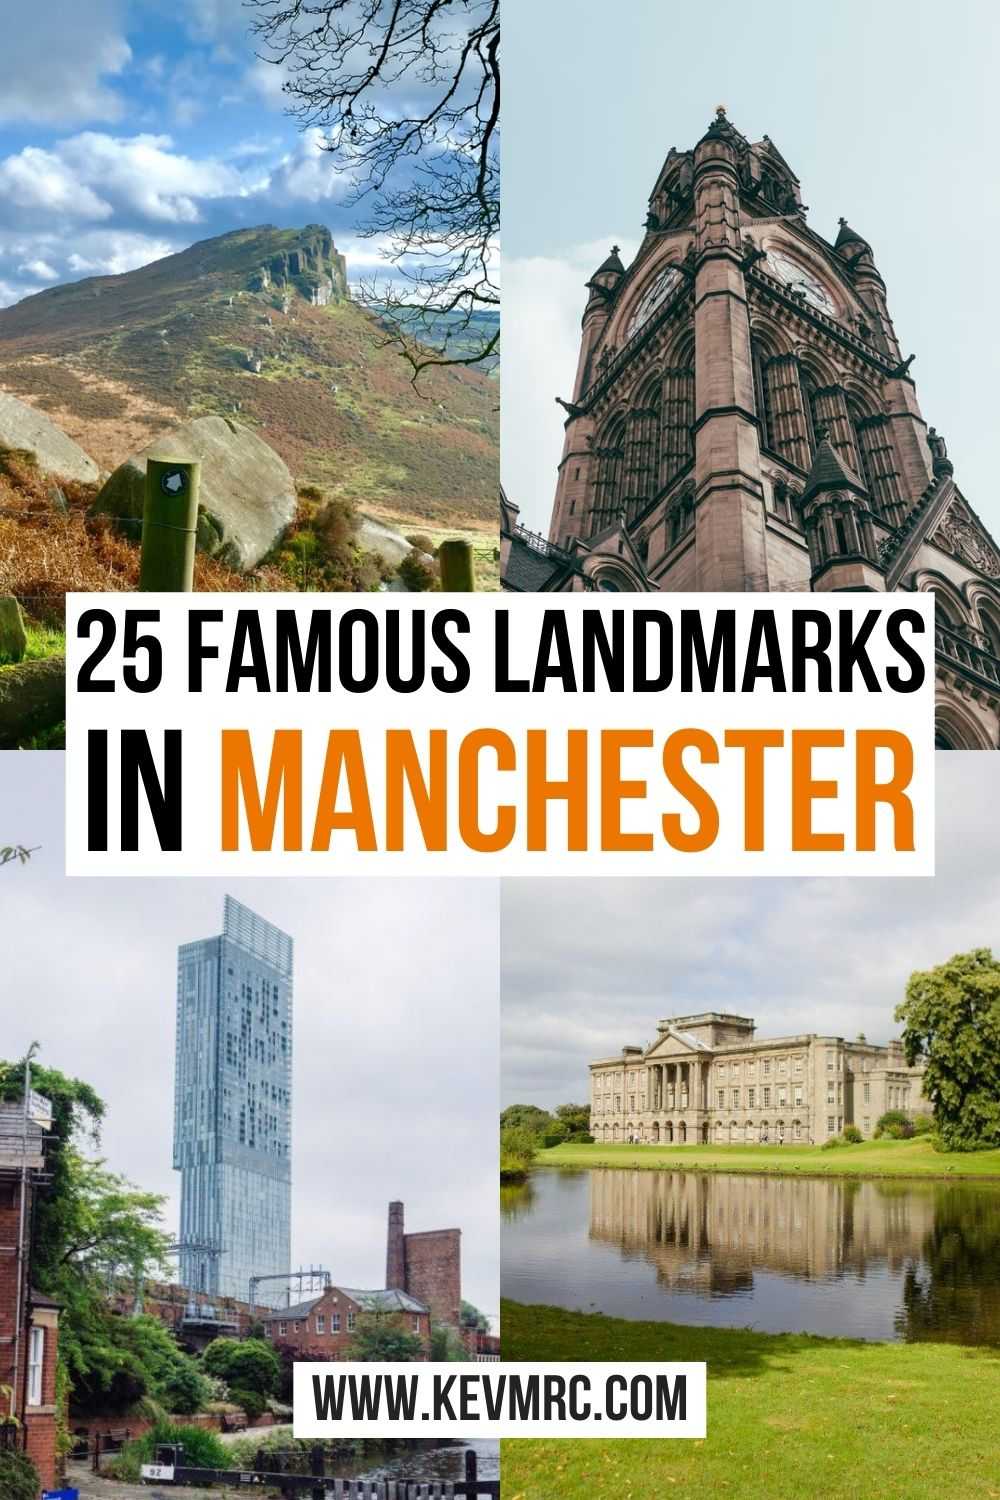 10 famous landmarks in Manchester England. Discover the best places to see in Manchester! england travel | travel england #manchester